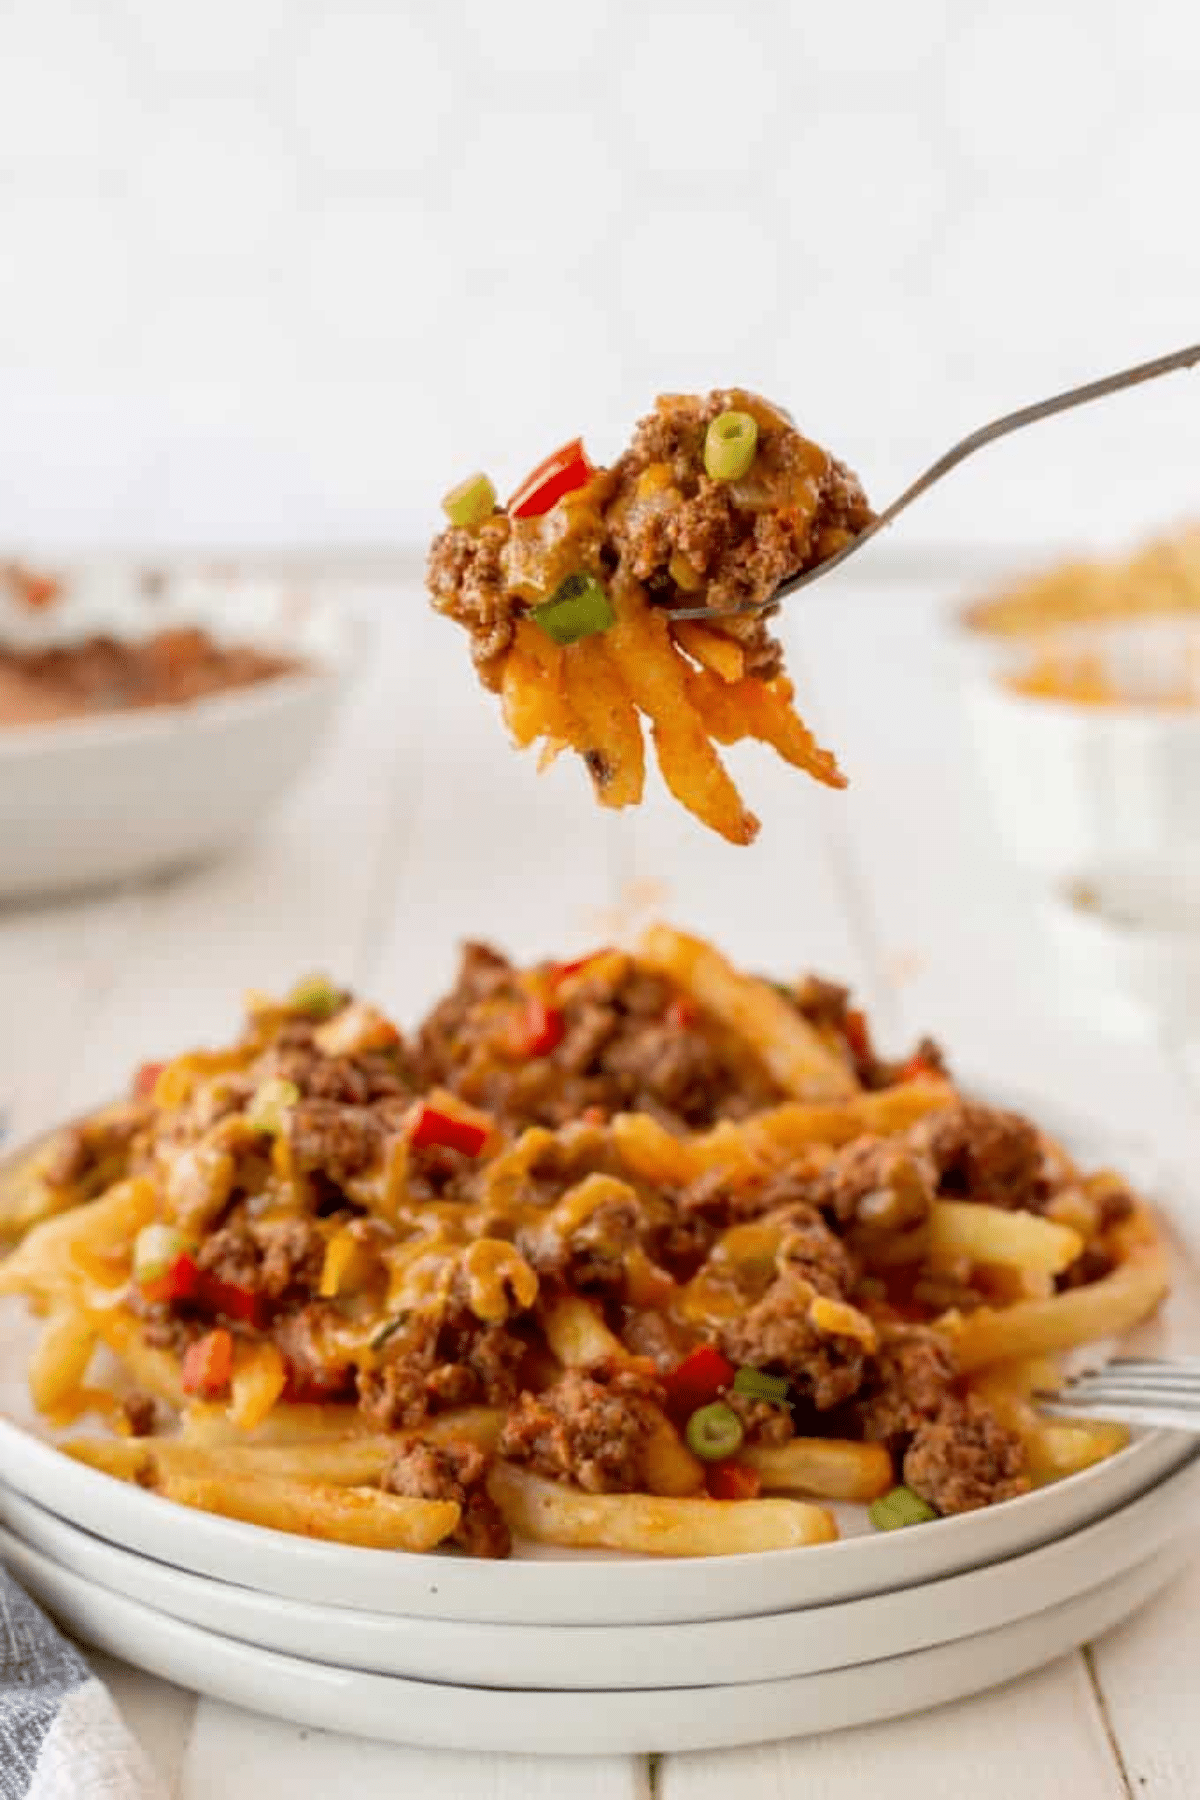 Taking a forkful of chili cheese fries. 